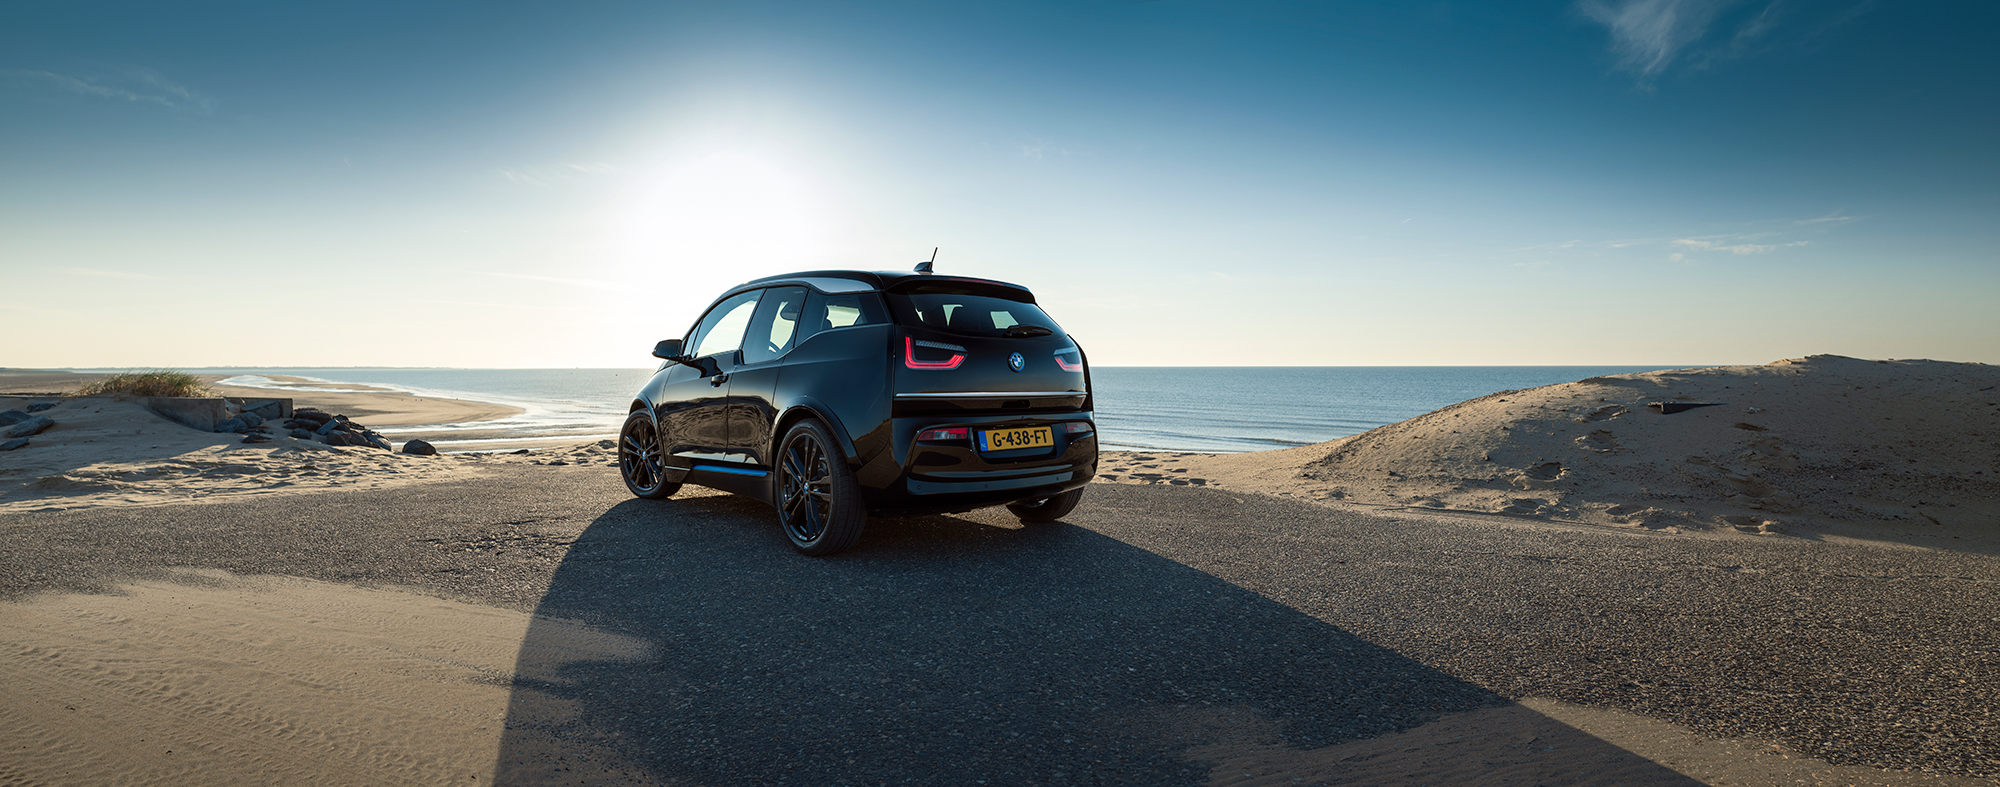 gijs spierings 2020 bmw i3 for the oceans 5